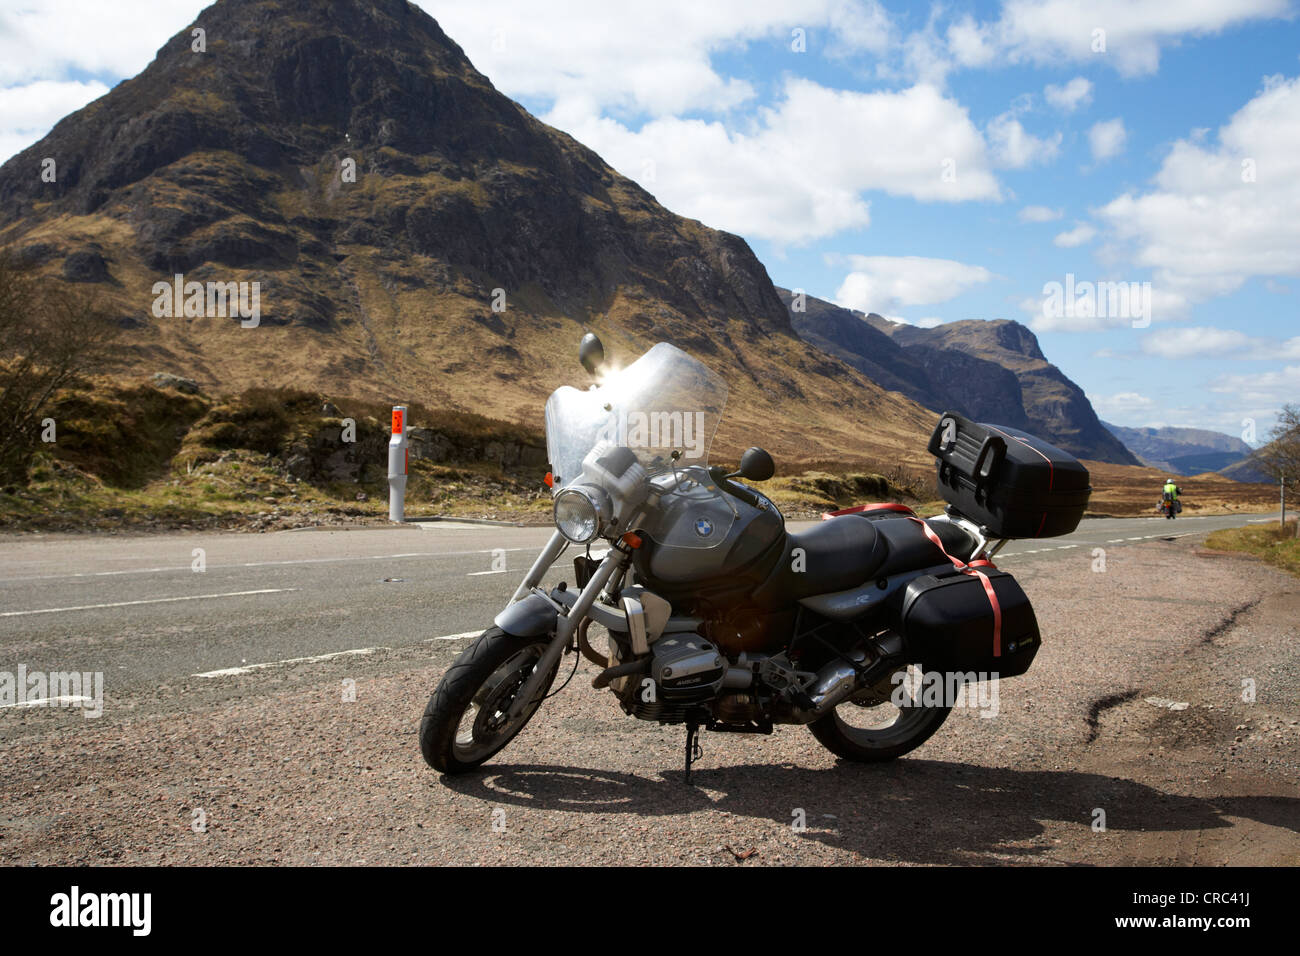 Touring Bmw Motorcycle Parked On The A Road In Front Of Passing Bike Buachaille Etive Beag In Glencoe Highlands Scotland Uk Stock Photo Alamy